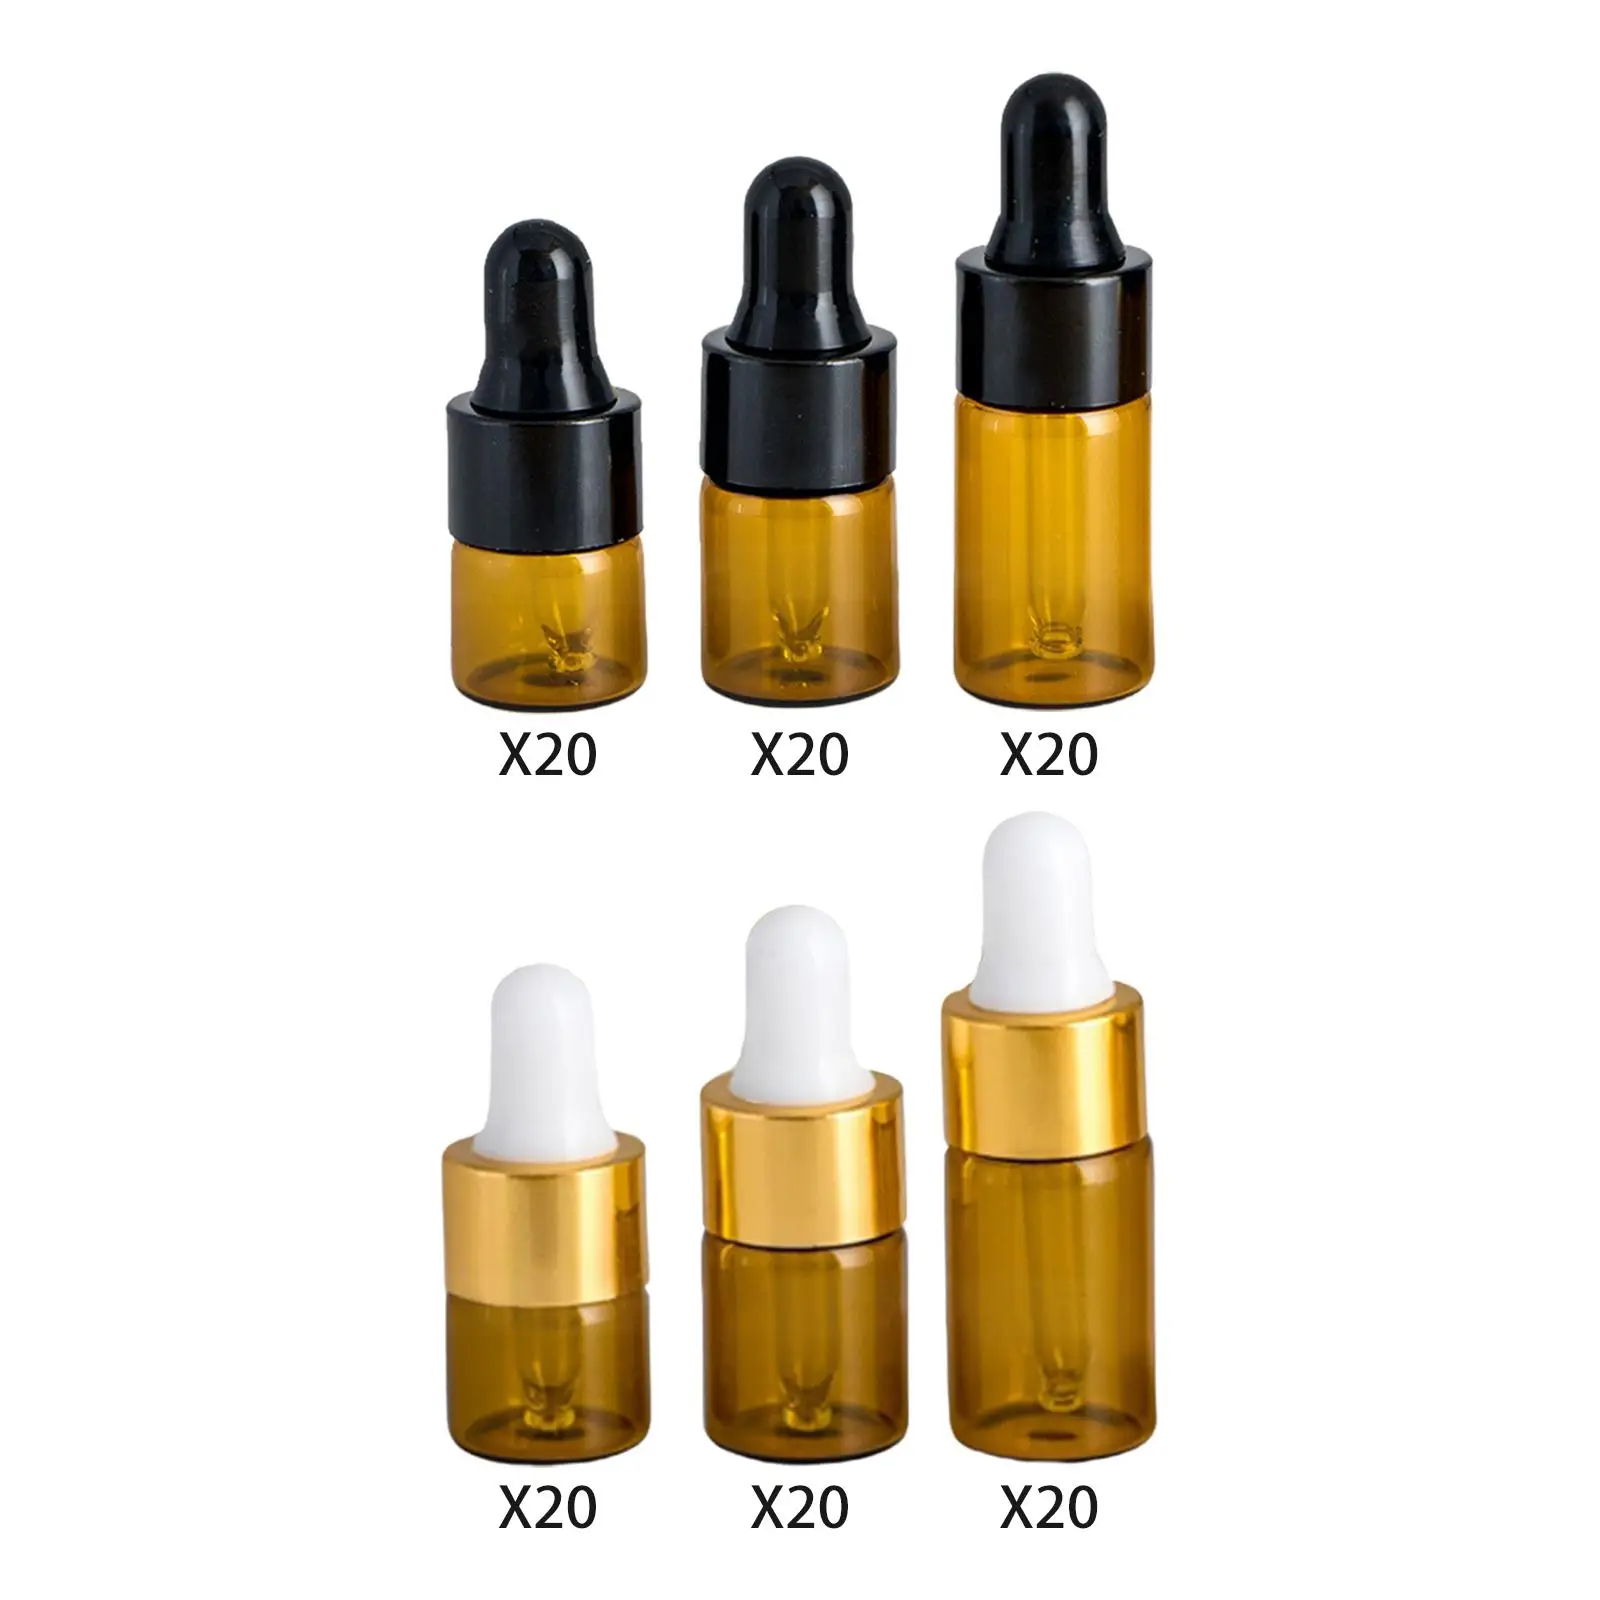 Small Dropper Bottles with Glass Eye Dropper Cosmetic Container Refillable Empty Essential Oil Bottle for Essential Oils Liquids